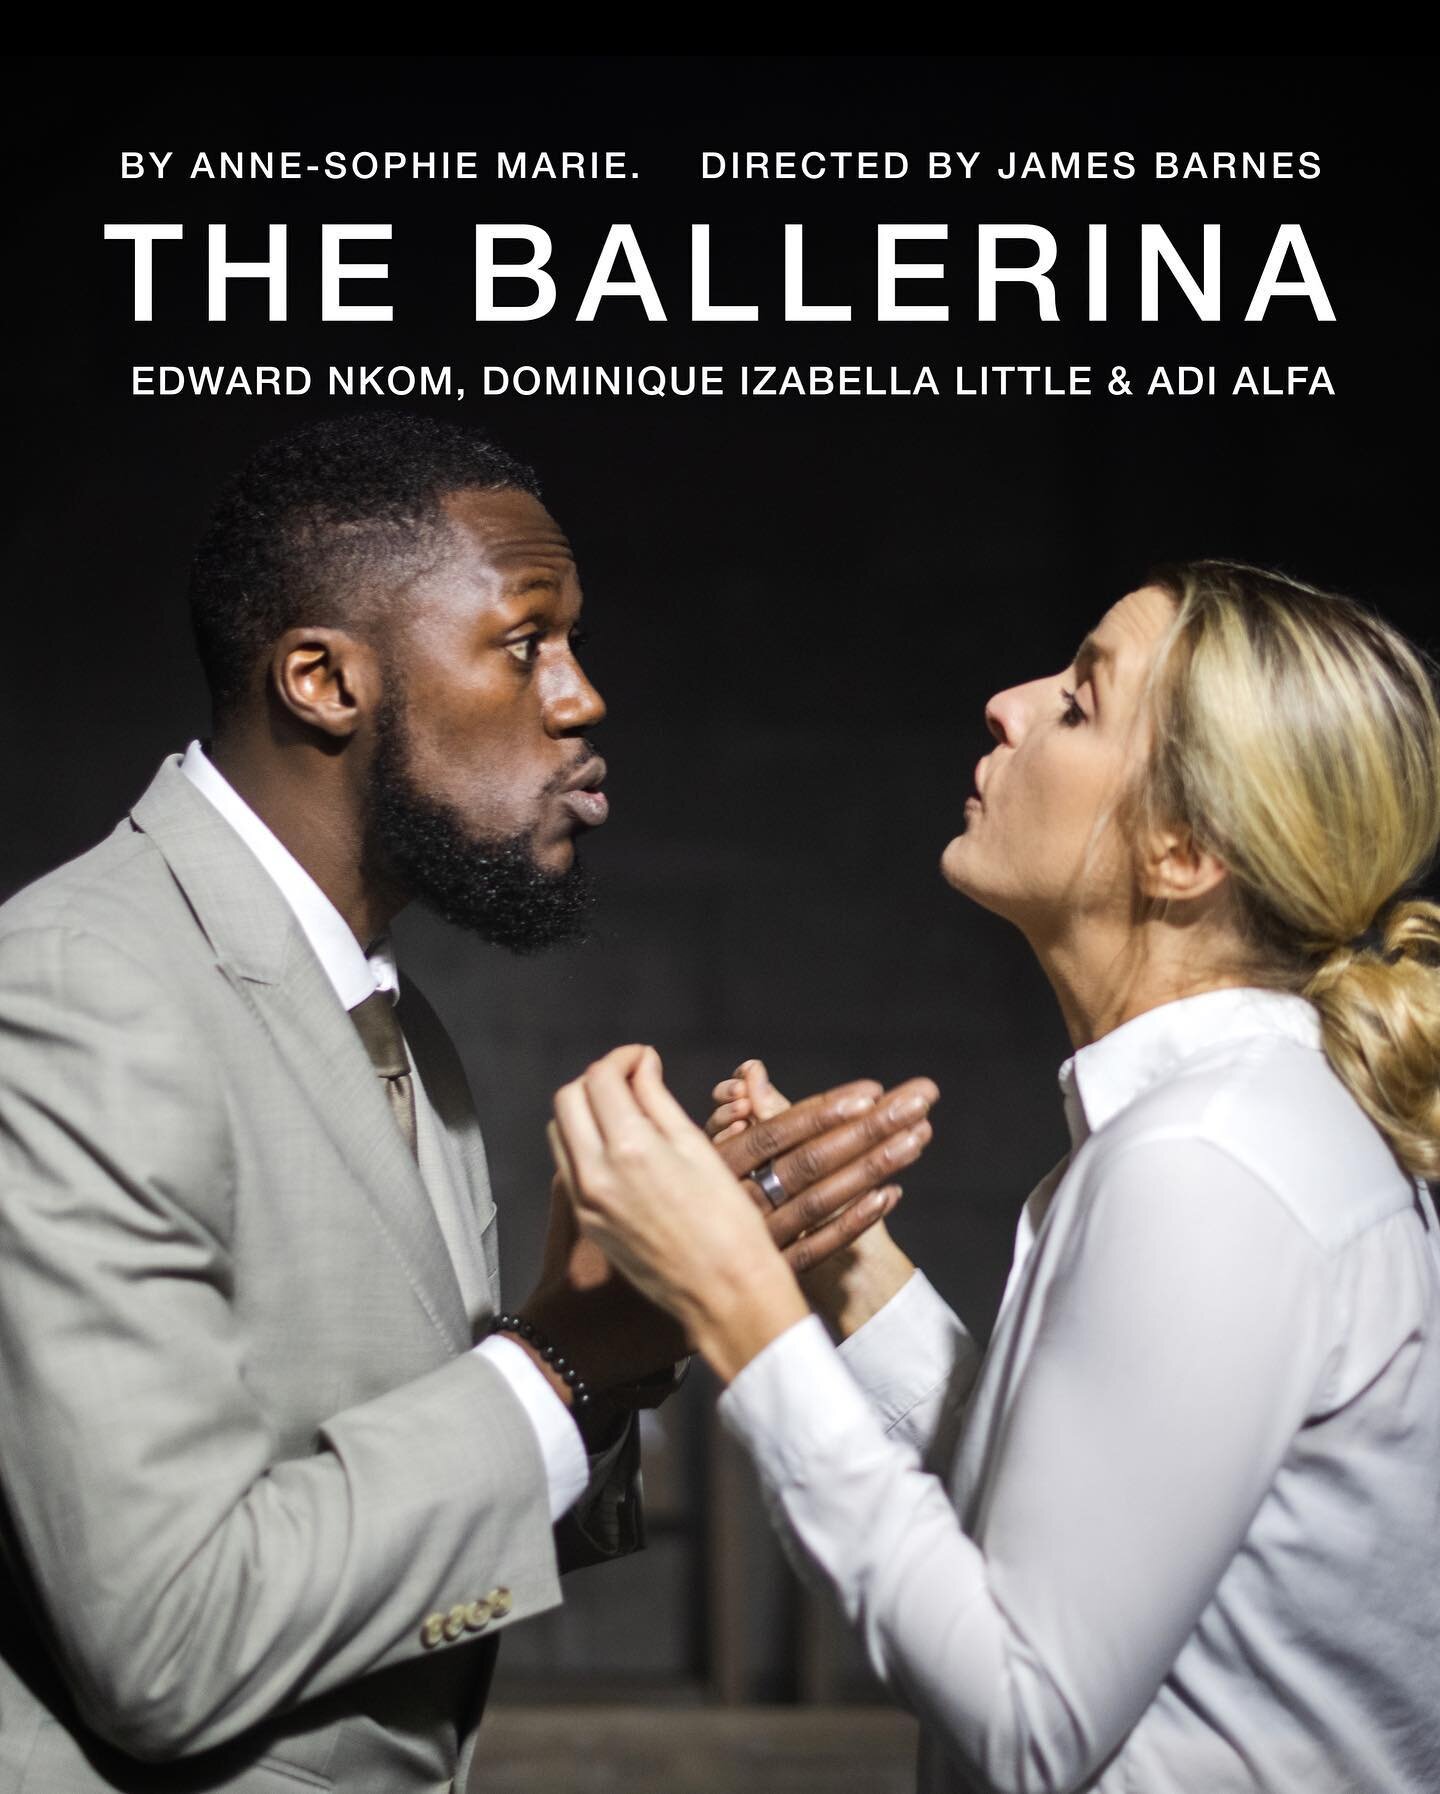 THE BALLERINA 🩰 🥷🏽 

Directed by @kouga_gennouske 
Written by
@annesophie_42 
Produced by @khaoseurope 
At @vaultfestival

Performed by: @edwardnkom.actor / @adi_alfa_x / @dominique_izabella_little 
and
@pauline.raybaud / @v.osborne15 / Alamo Pere